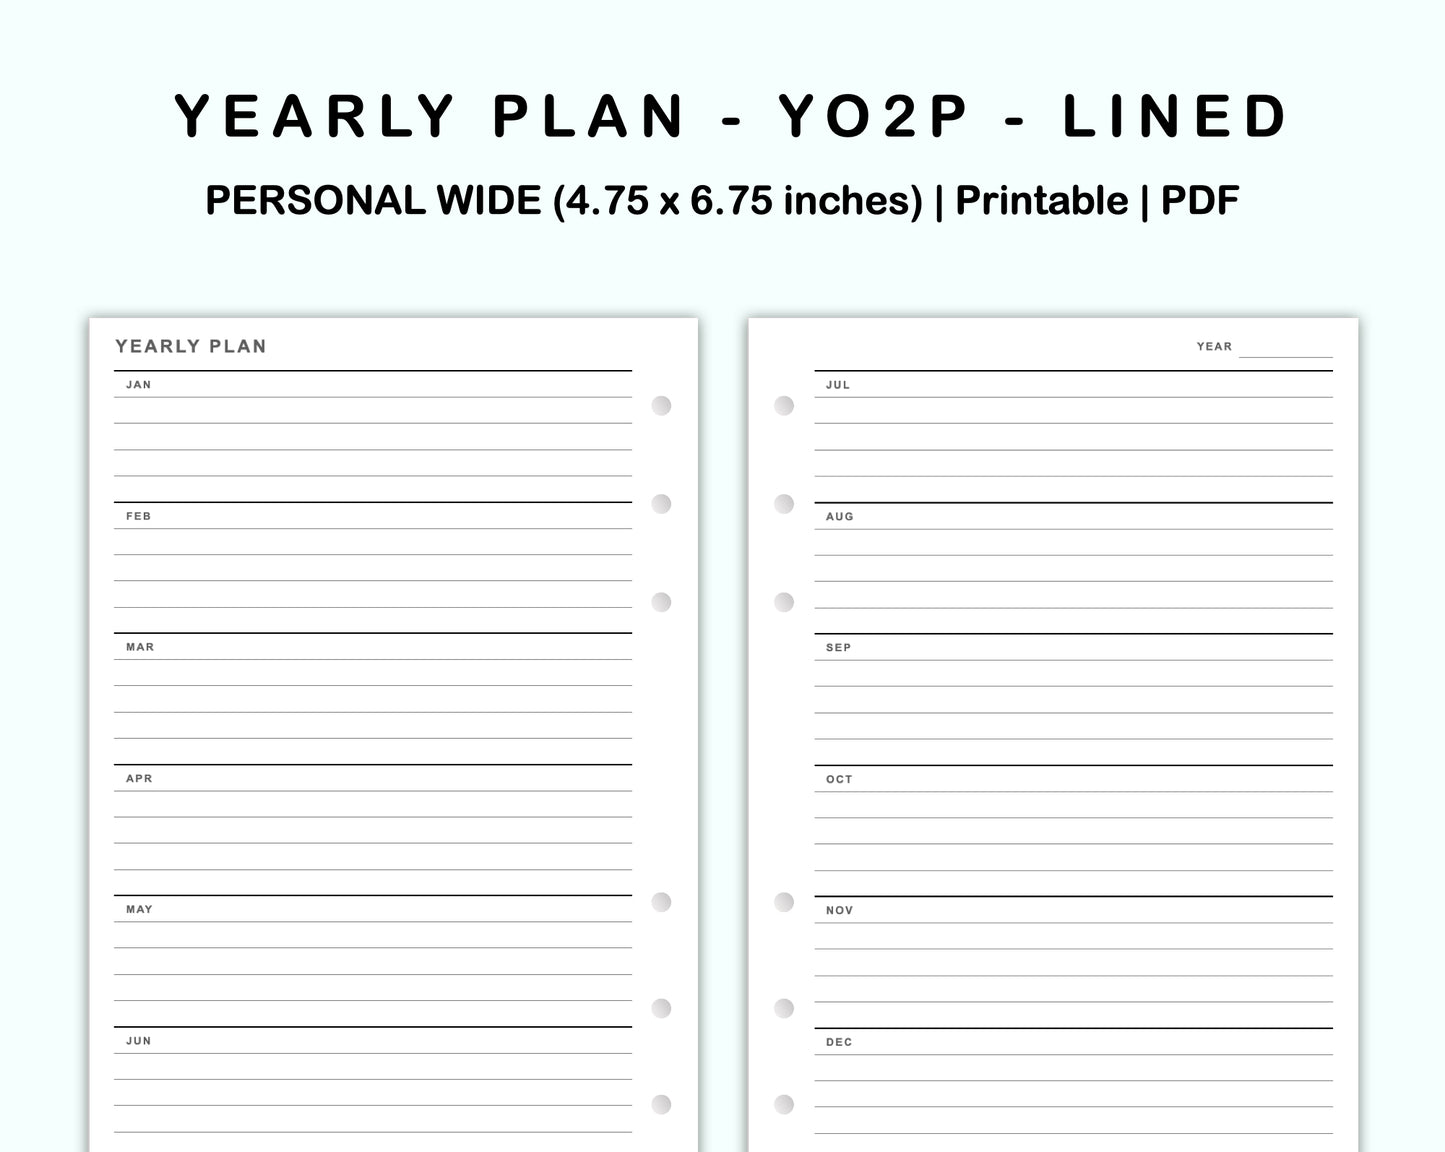 Personal Wide Inserts - Yearly Plan - YO2P - Lined